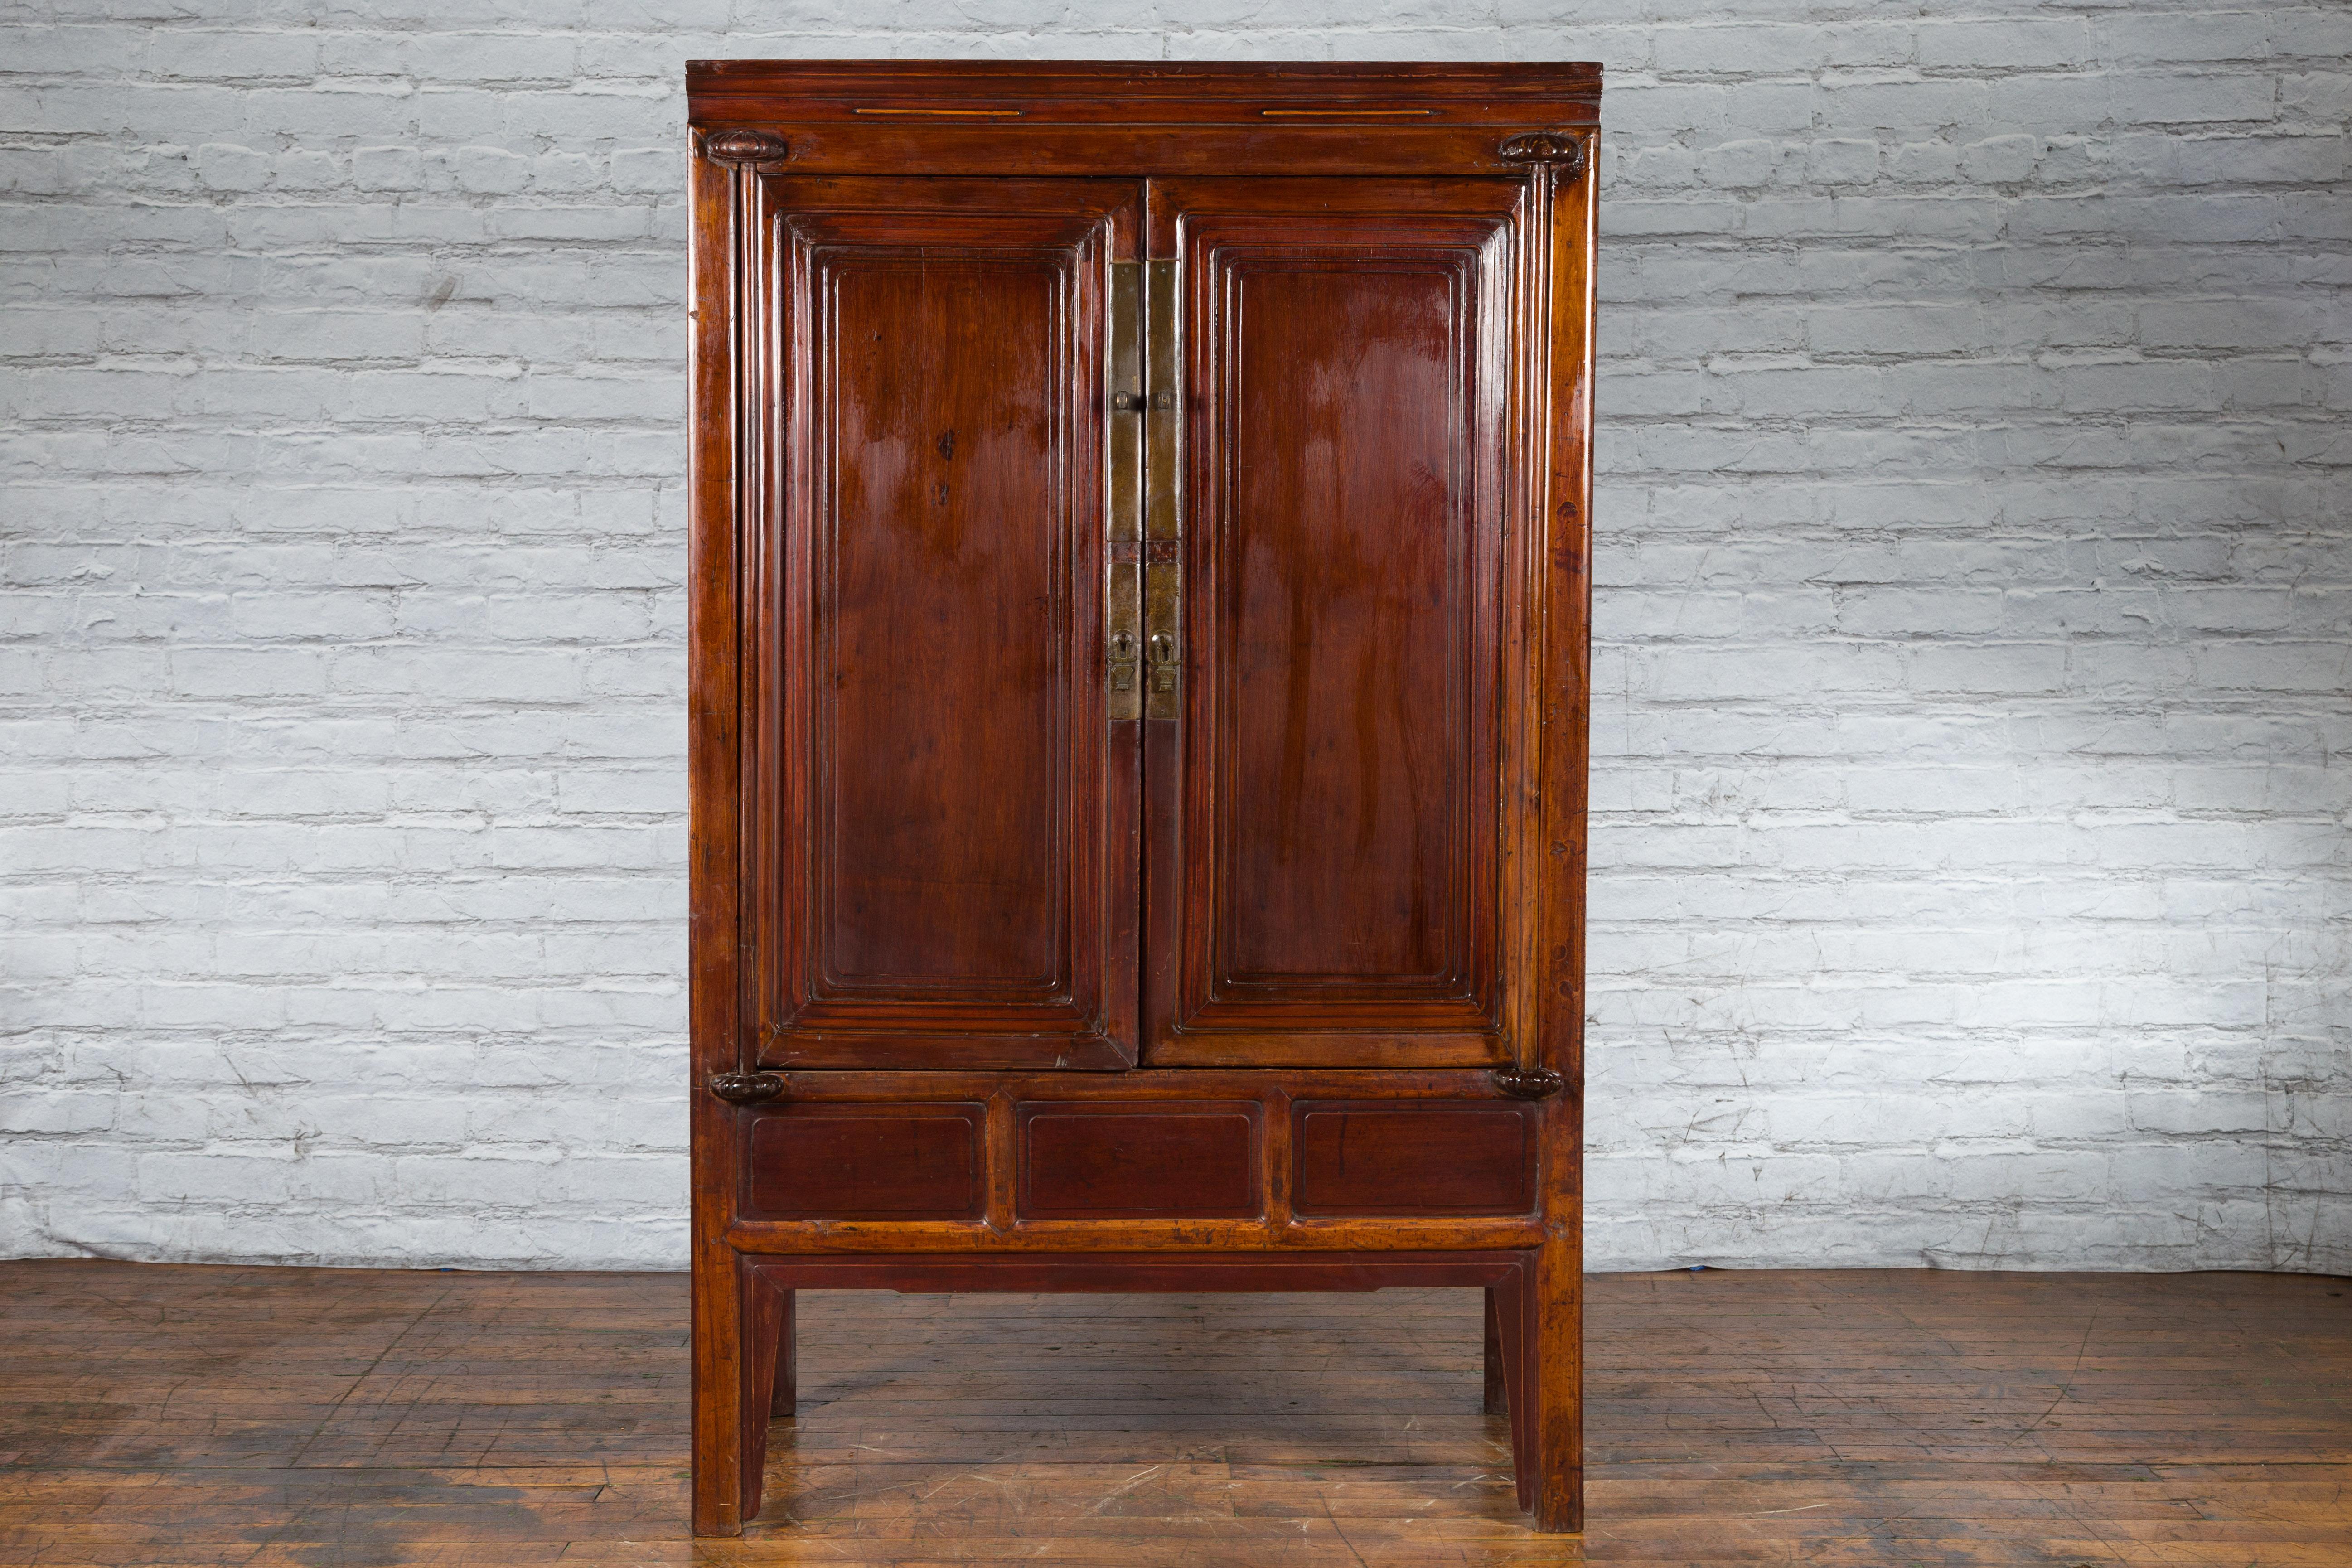 A Chinese Qing dynasty period ningbo cypress cabinet from the 19th century with brass hardware. Created in China during the Qing Dynasty in the 19th century, this ningbo cabinet features a linear silhouette perfectly complimented by a dark brown